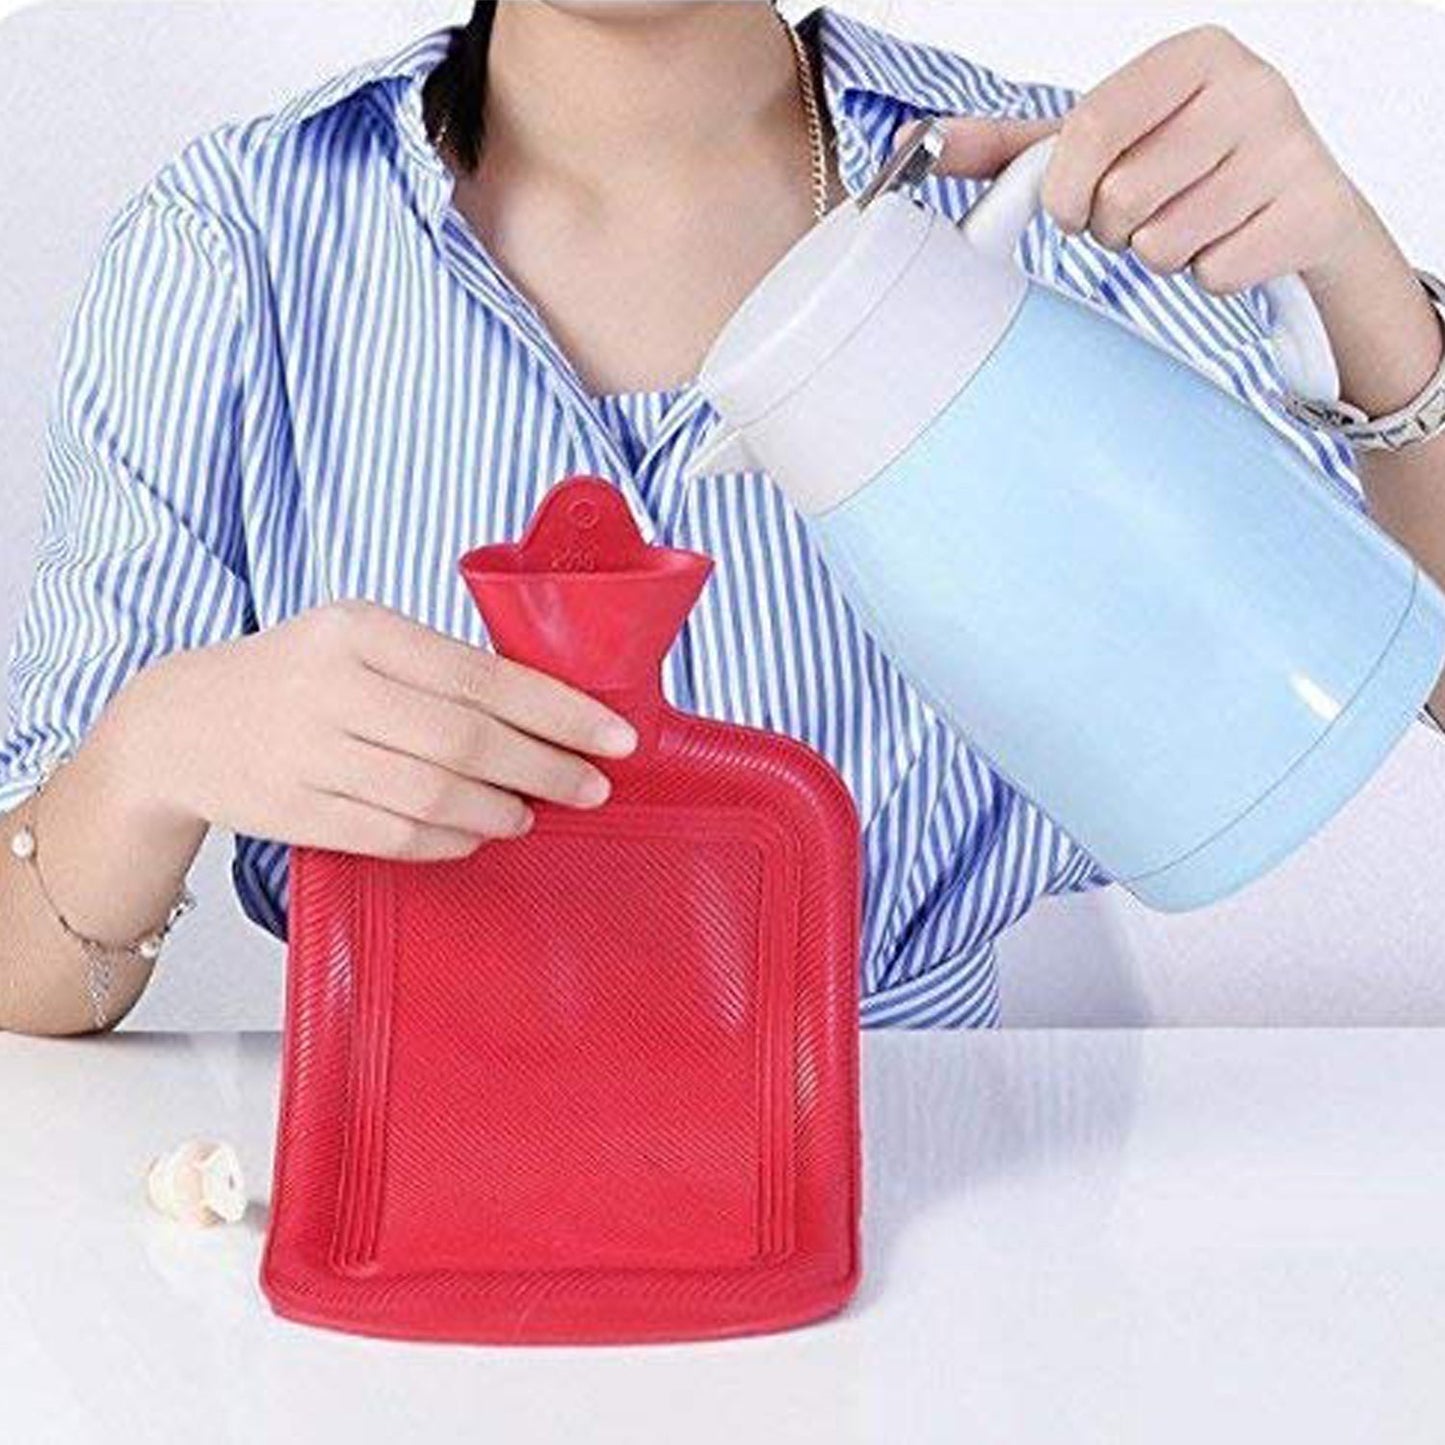 395 (Small) Rubber Hot Water Heating Pad Bag for Pain Relief JK Trends